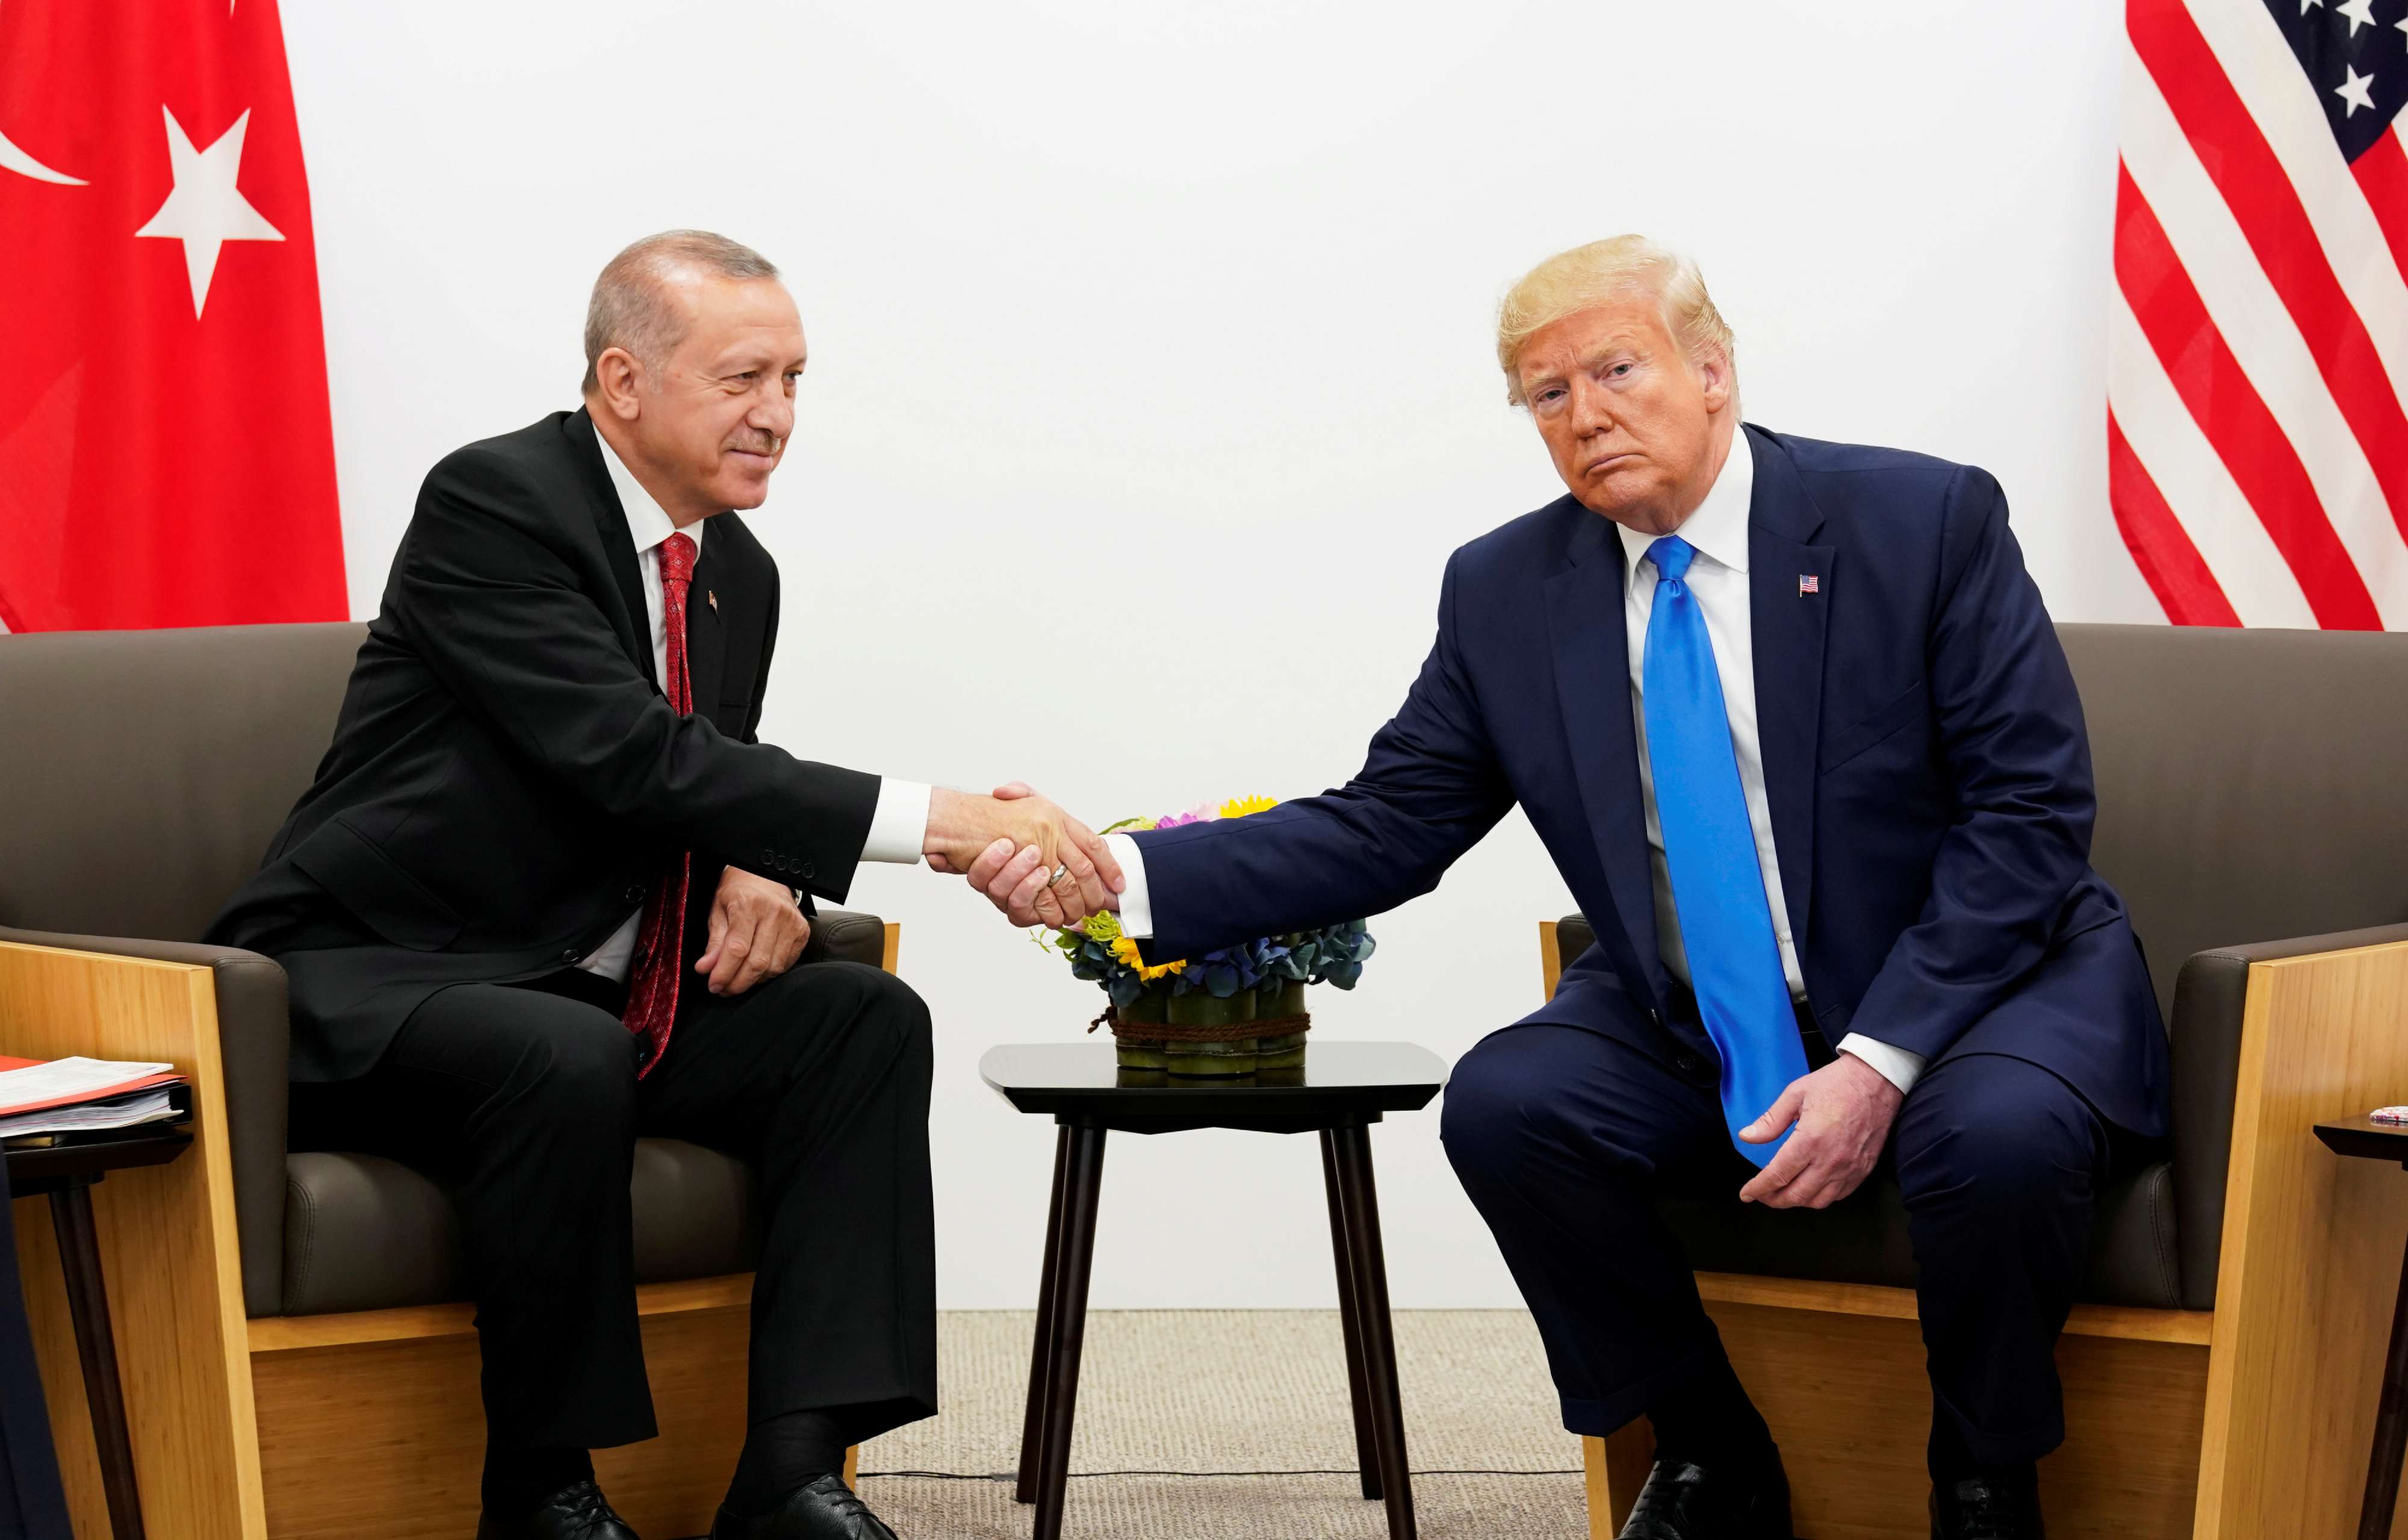 Erdogan said Turkey still wanted to buy Patriot missile defence systems from Washington